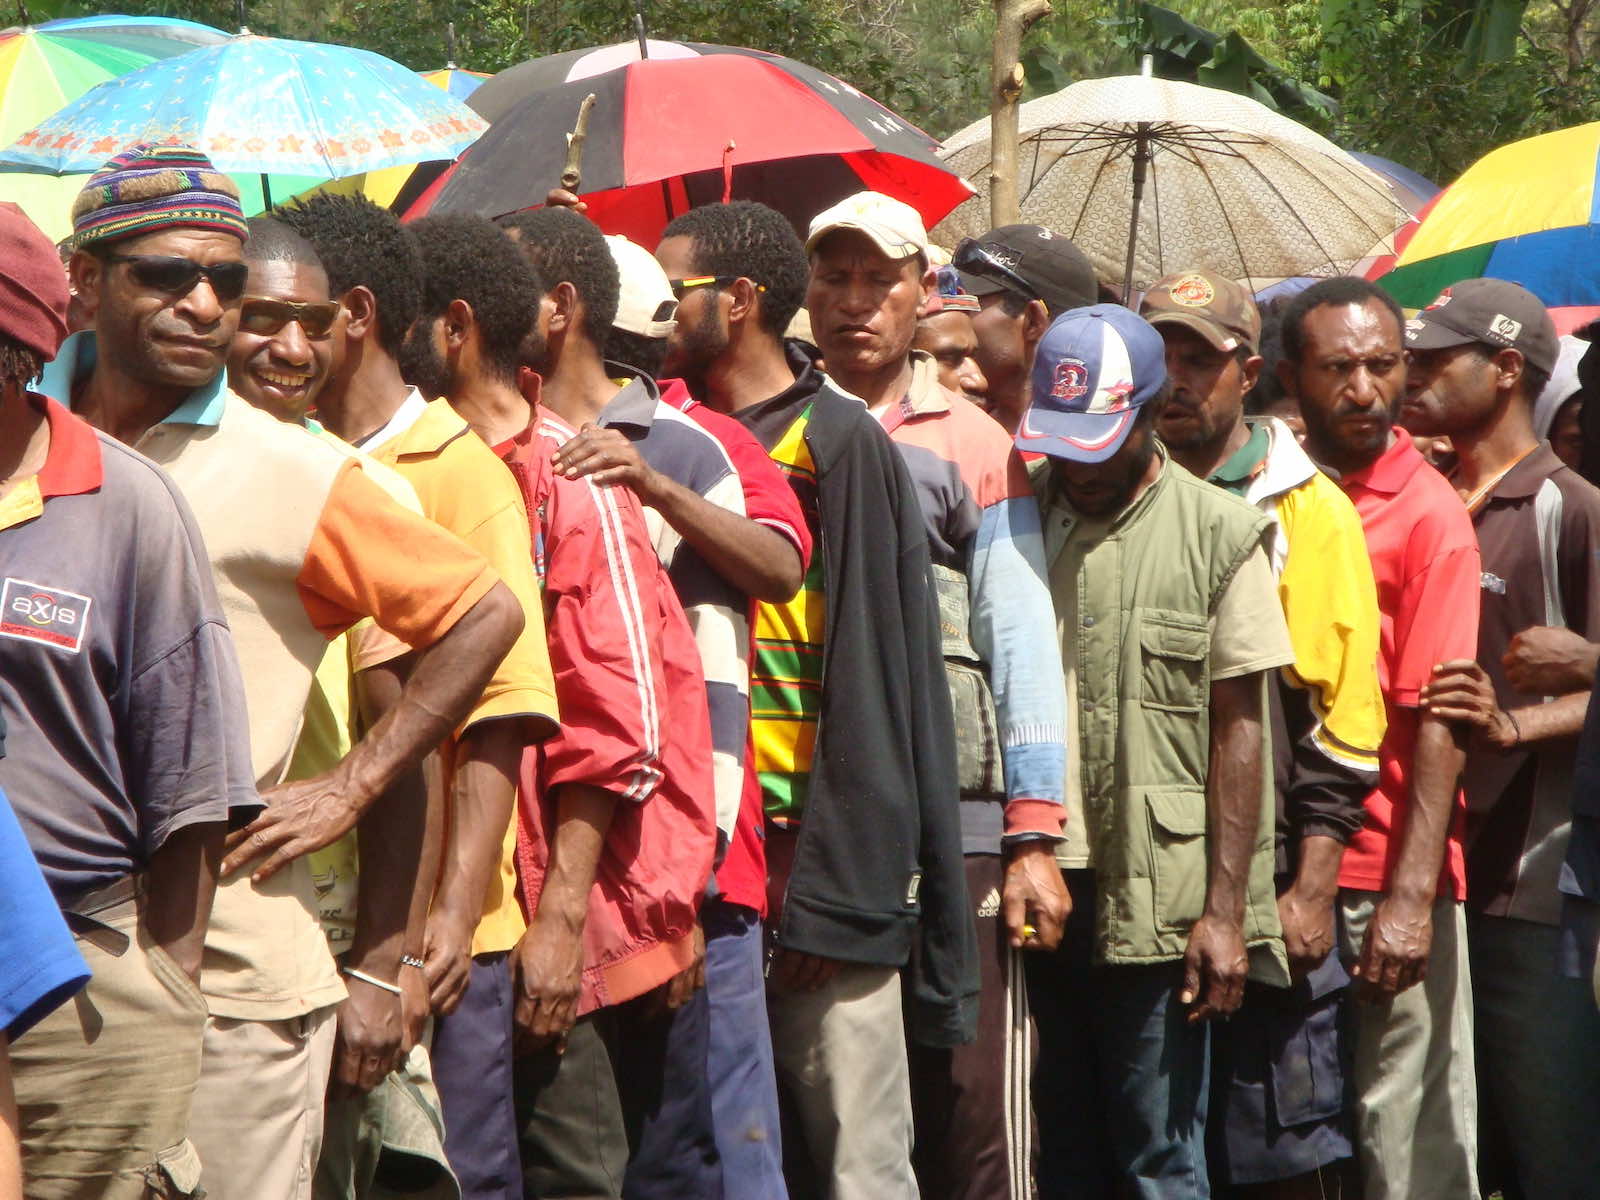 Men queue to vote in the highlands of Papua New Guinea during the 2012 election (Treva Braun/Commonwealth Secretariat/Flickr)